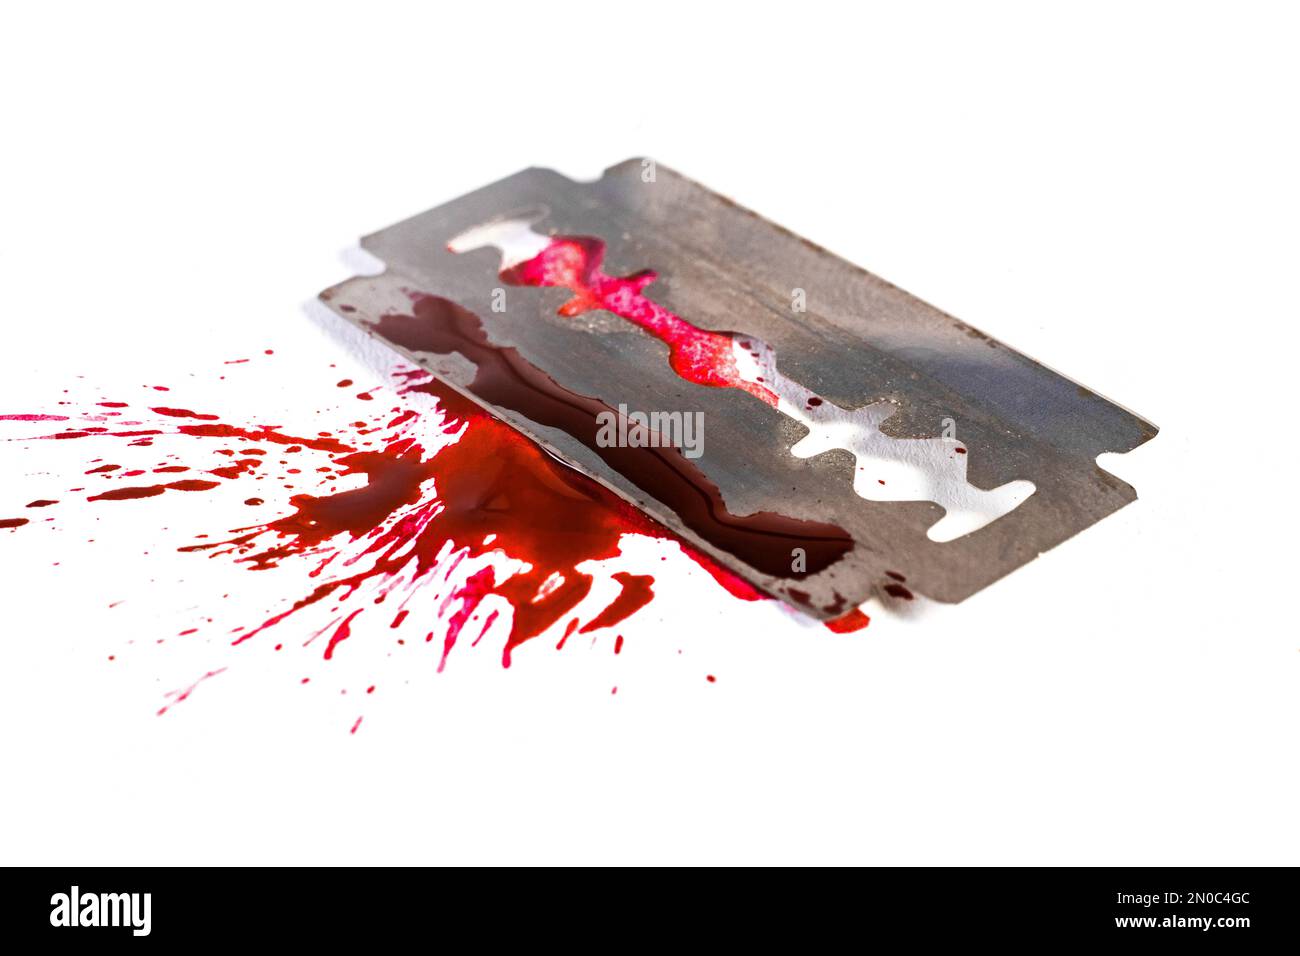 Razor blade wit blood splash and blood drops, isolated on white, selective focus macro. suicide concept Stock Photo